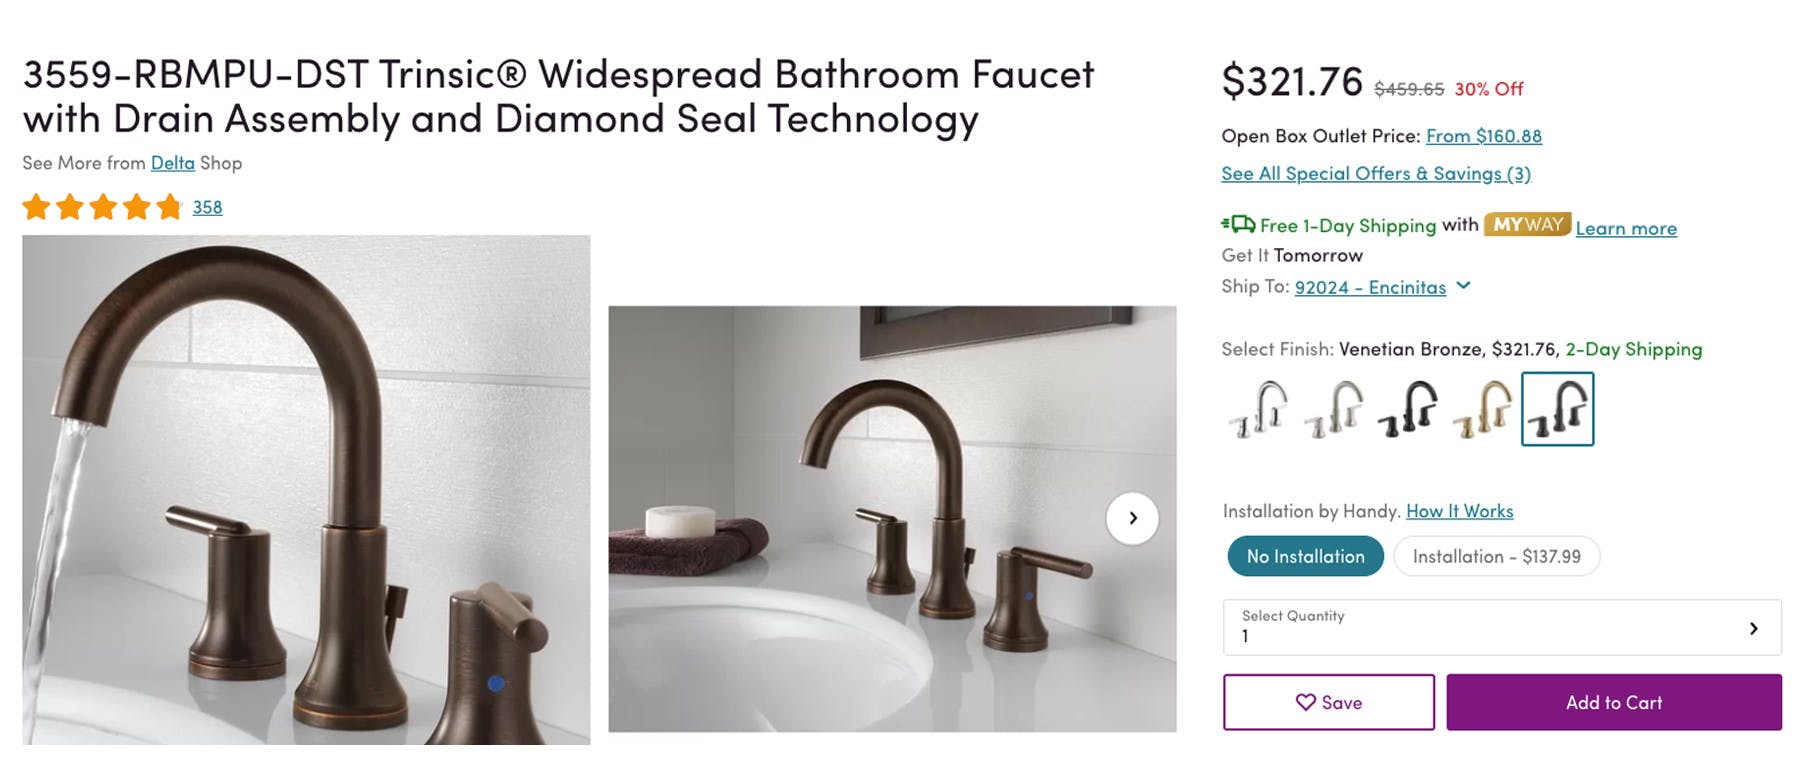 18 Hacks And Tips For Winning All The Wayfair Deals The Krazy